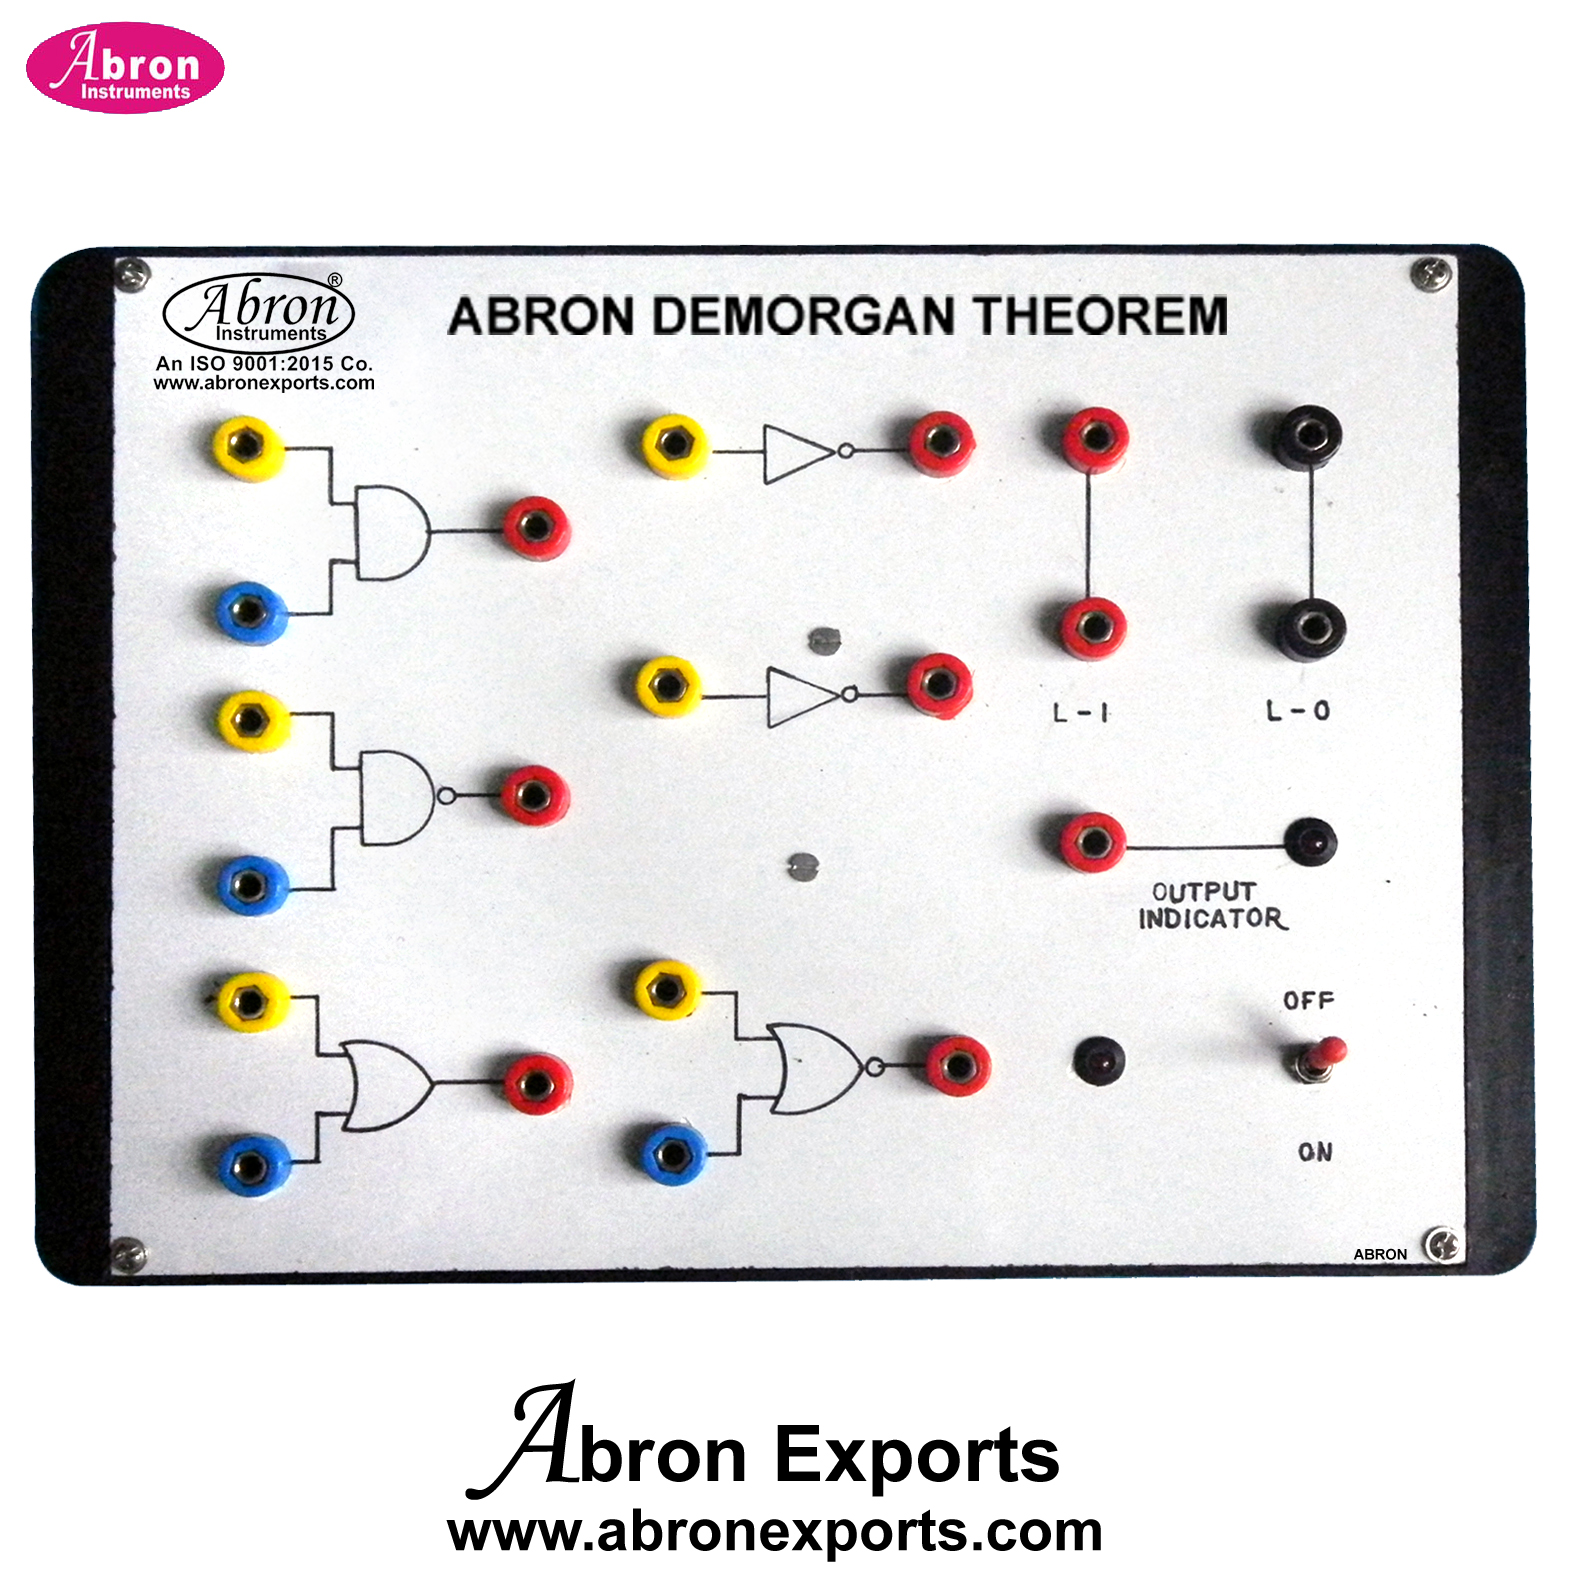 Study Theorem Demorgan Theorem With Power Supply Without Meters Electronic Trainer Kit Abron AE-1430DE 